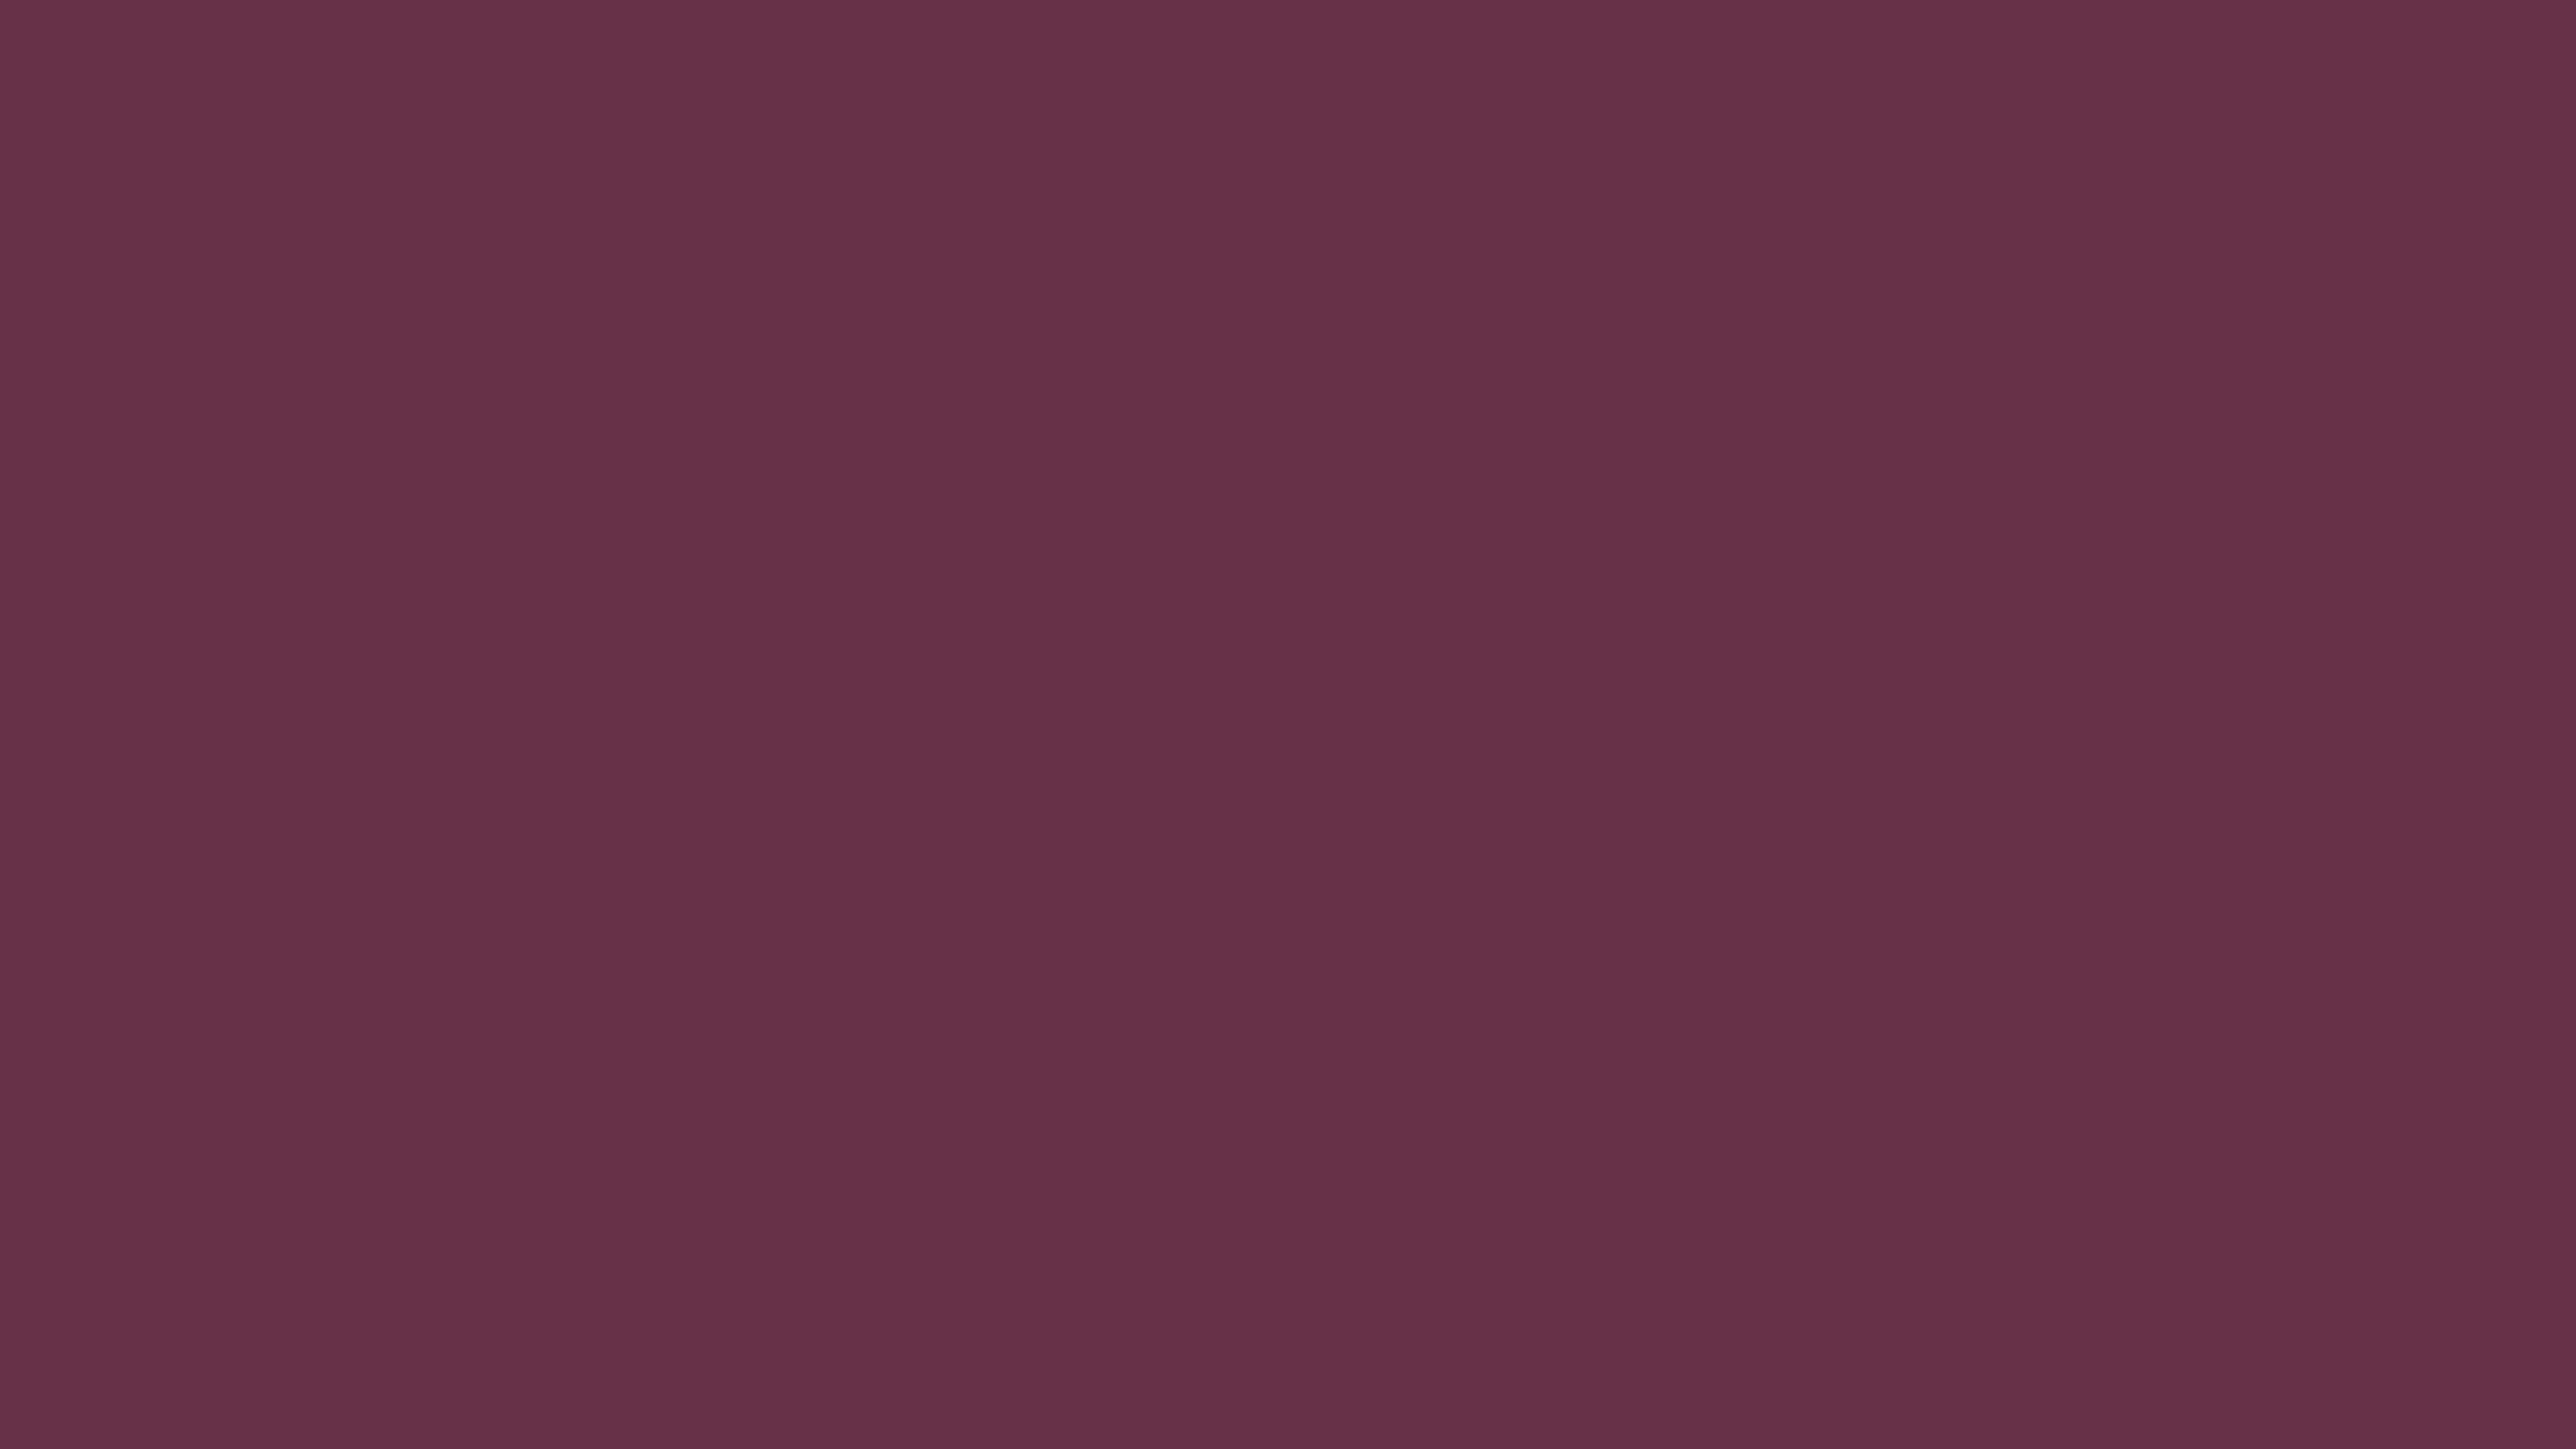 5120x2880 Wine Dregs Solid Color Background